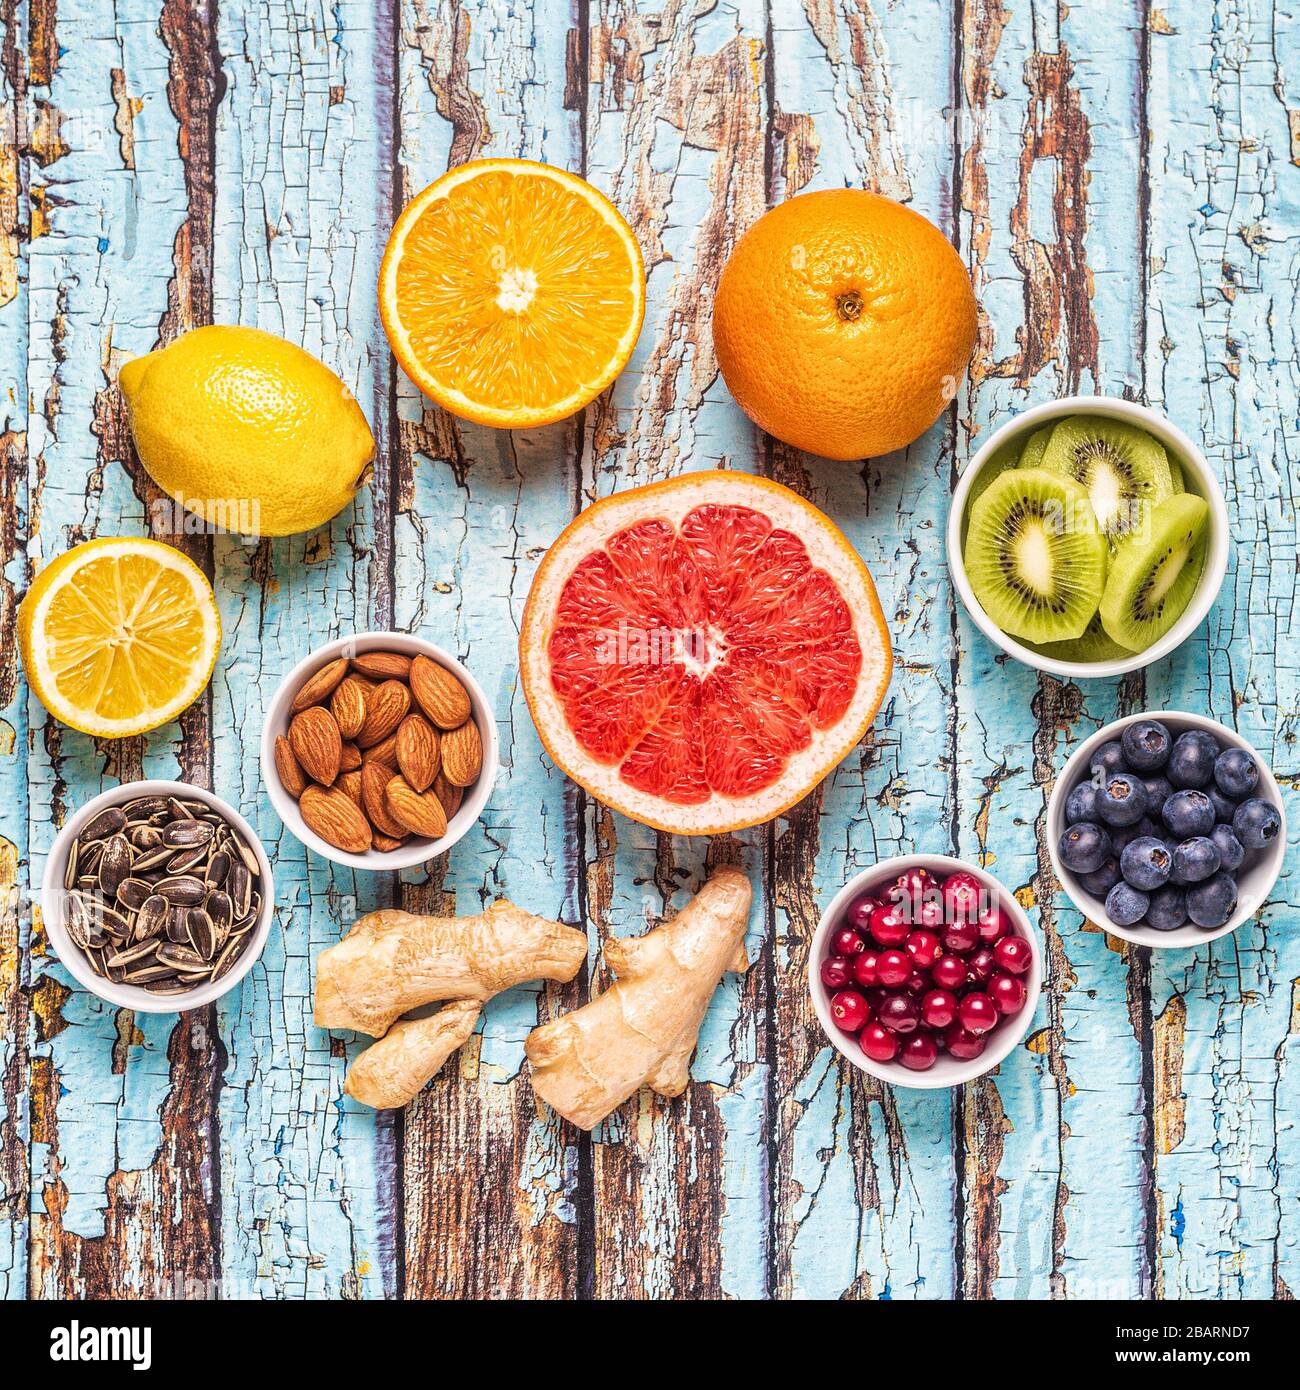 Superfoods for Immunity boosting and cold remedies, top view. Stock Photo